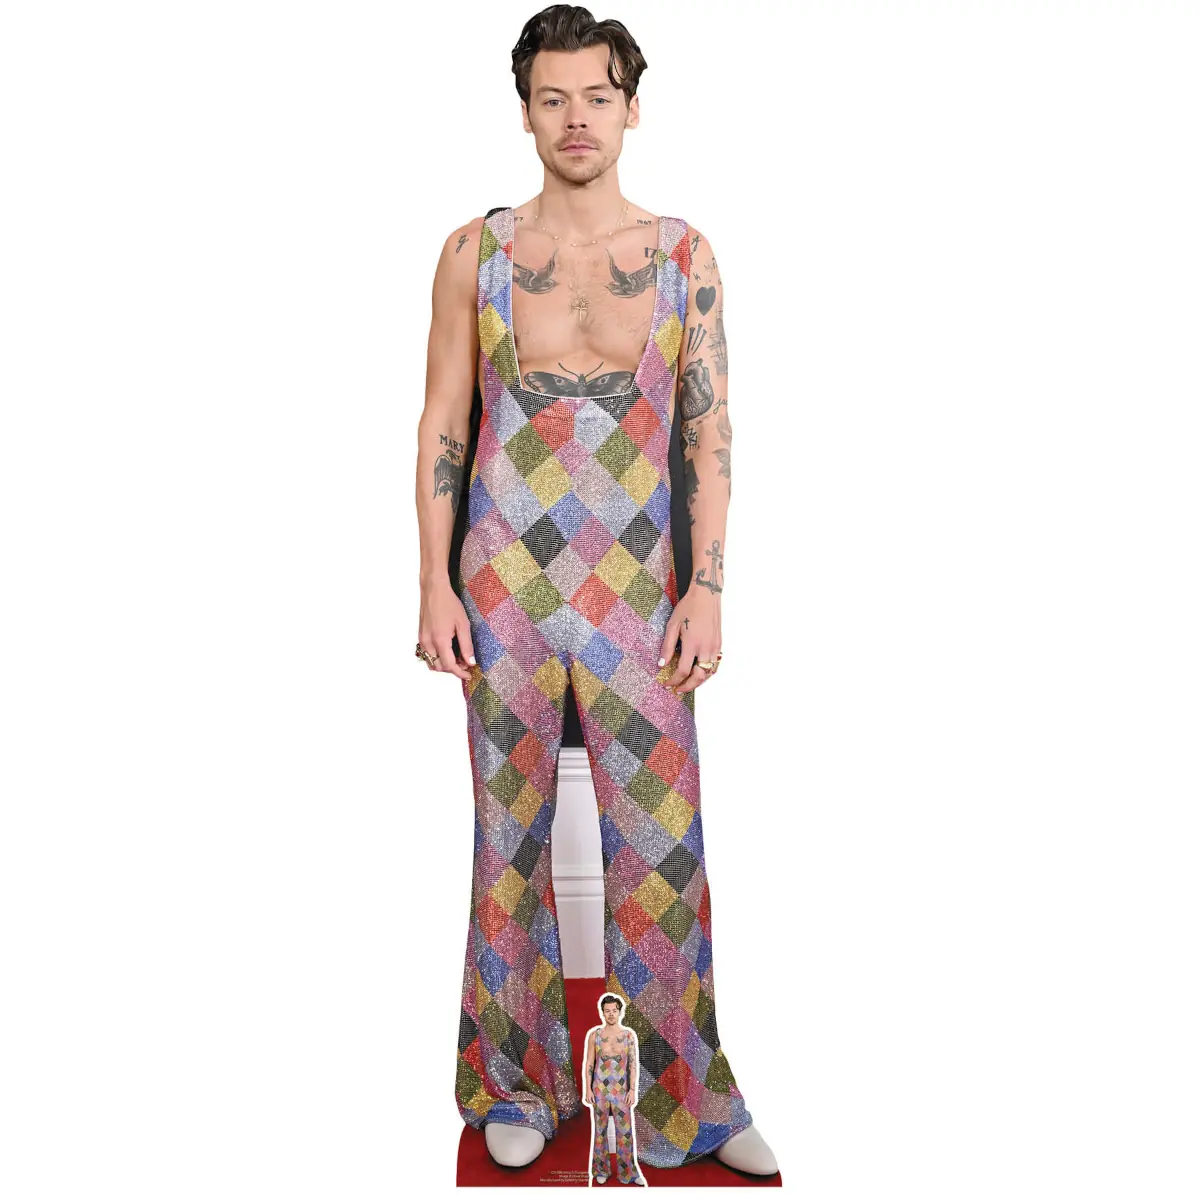 Harry Styles Dungarees English Singer Songwriter Lifesize + Mini Cardboard Cutout Front